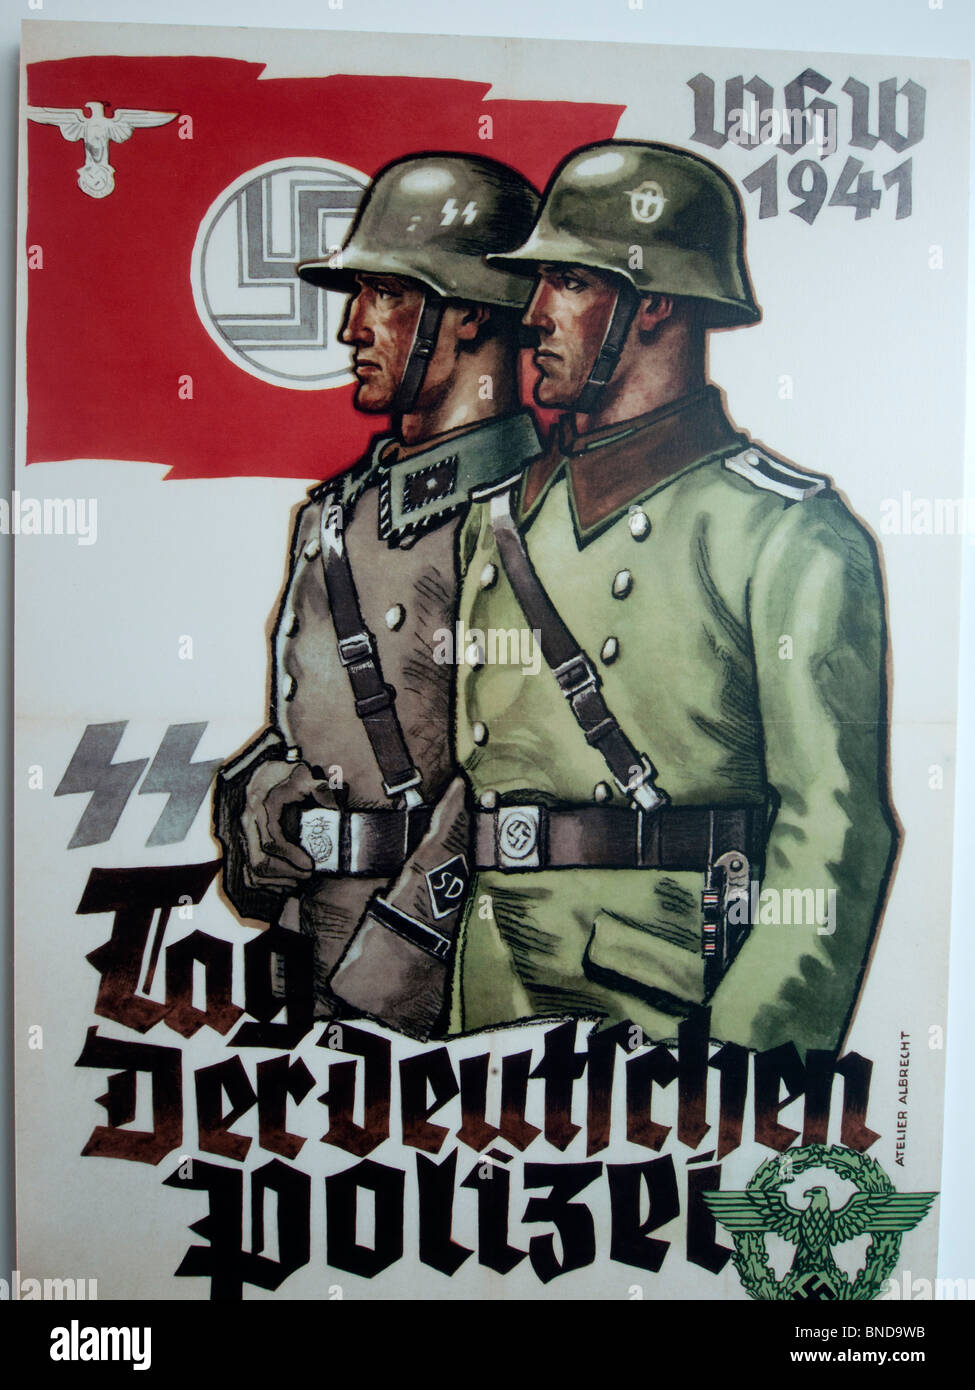 Nazi era poster of Gestapo on display at new Topographie des terrors exhibition center in Berlin Germany, former HQ of Gestapo Stock Photo